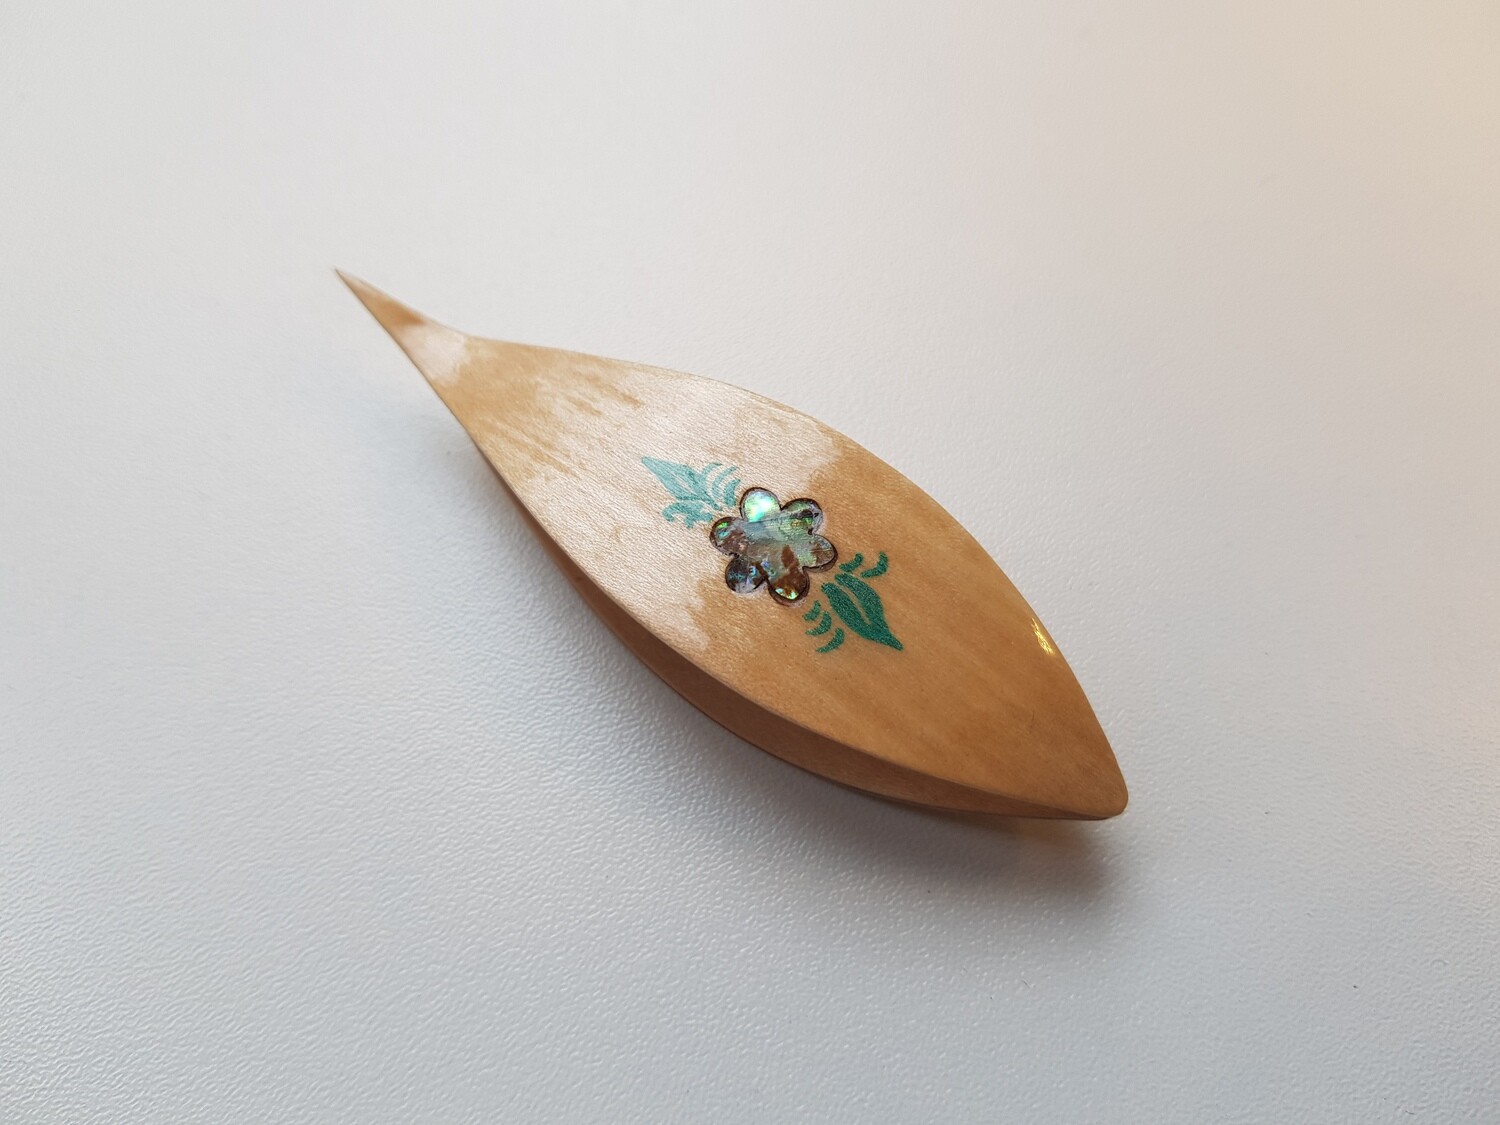 Tatting Shuttle With Pick​ Maple Mother-of-Pearl Flower Inlay​ And Leaves Painted